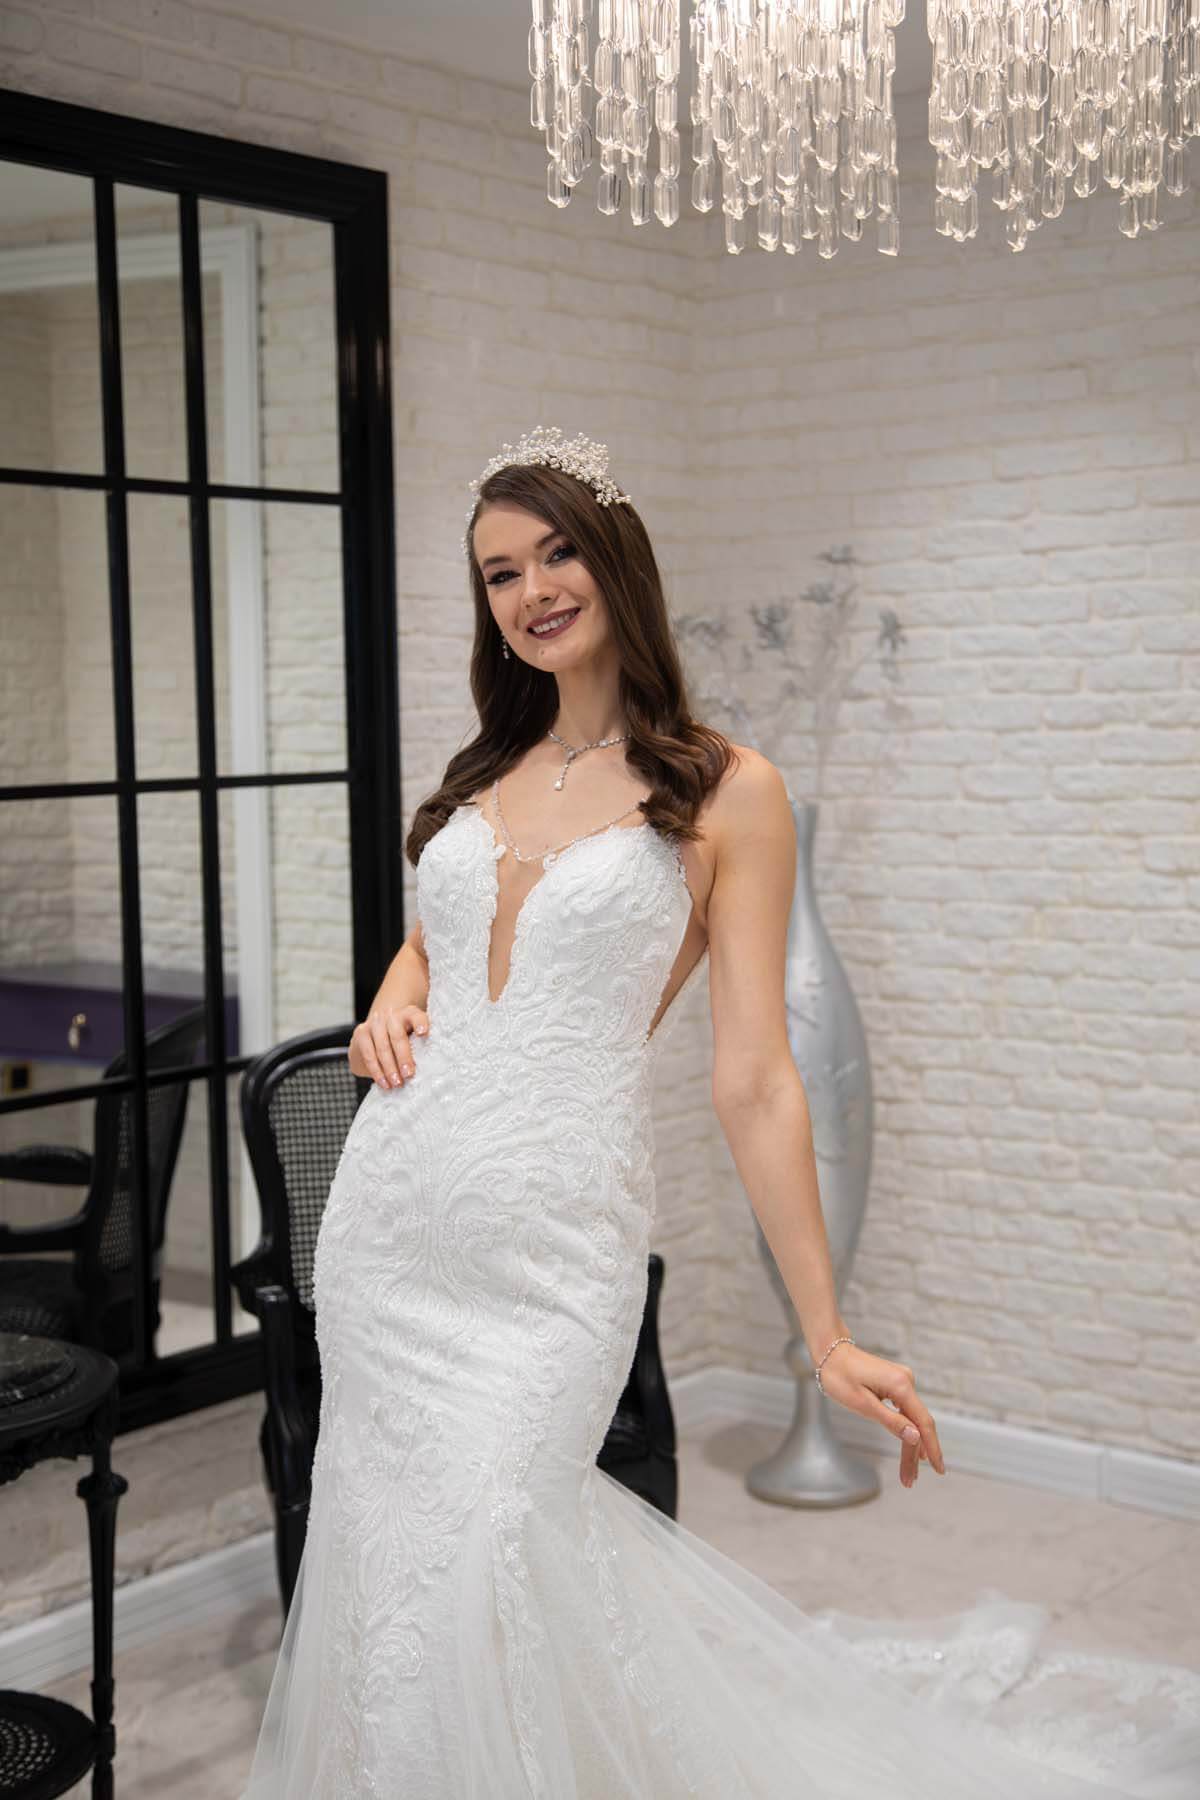 3D Embroidered Mermaid Tail Wedding Dress